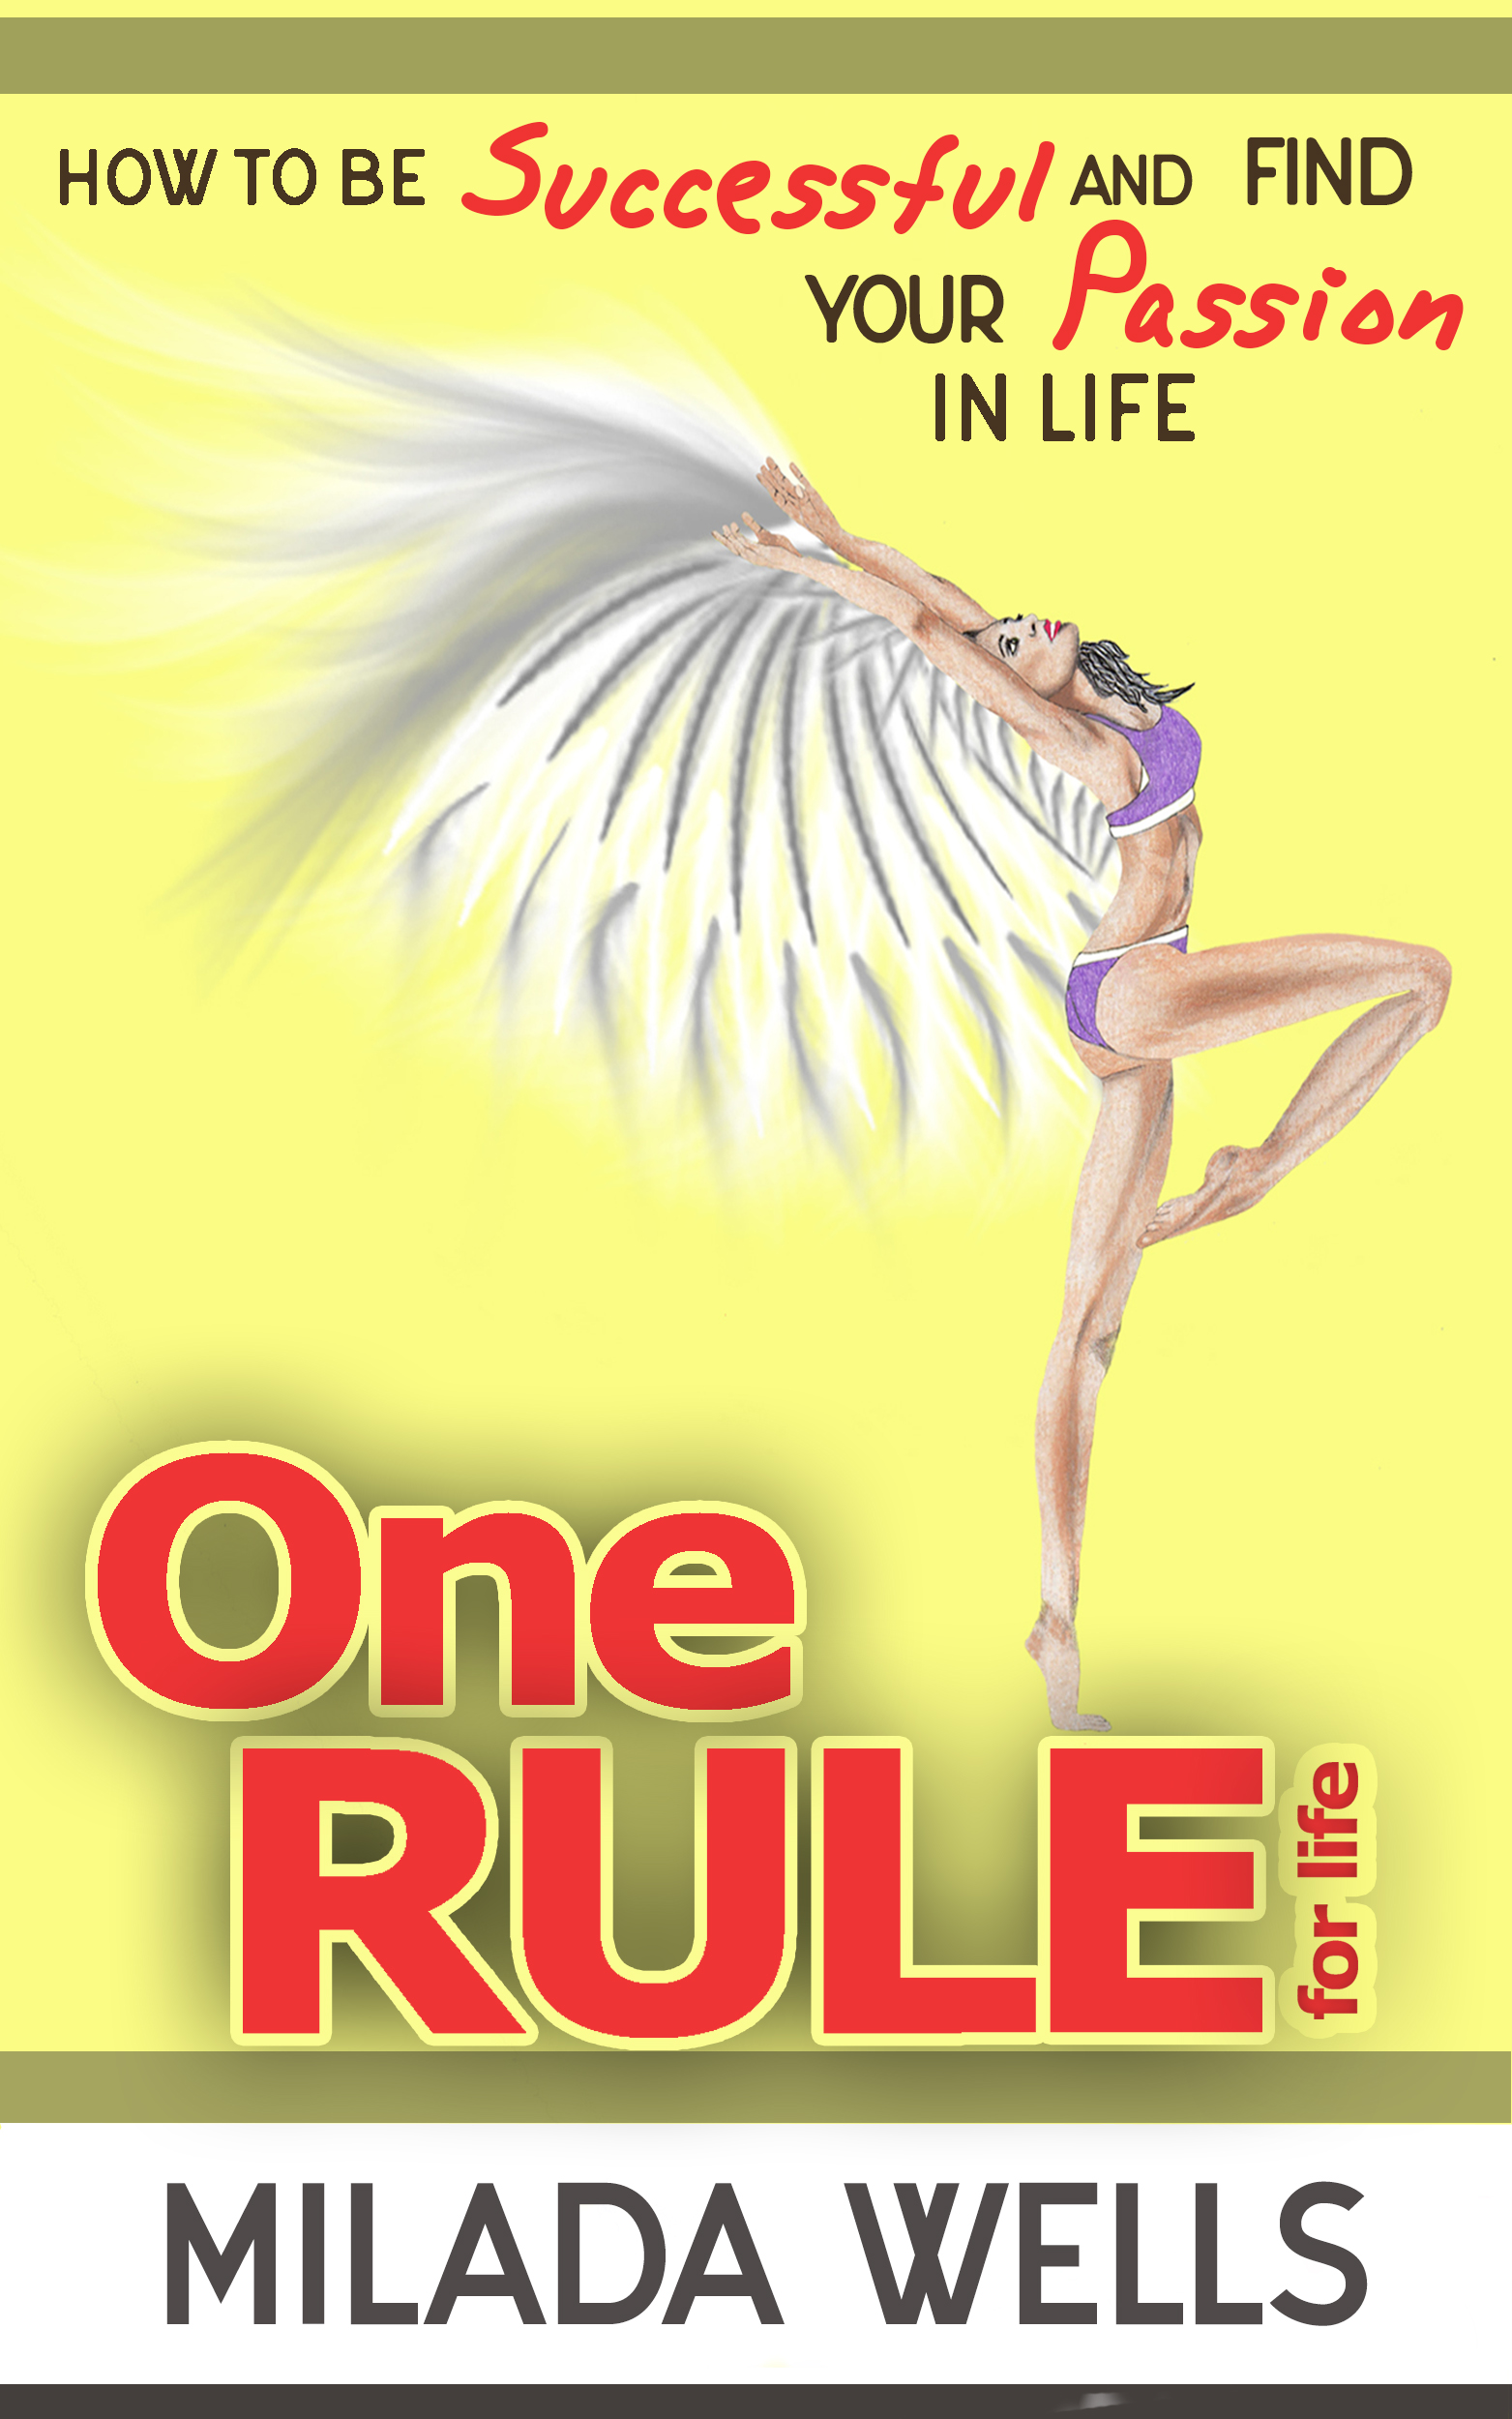 FREE: One Rule for Life: How to Be Successful and Find Your Passion in Life by Milada Wells